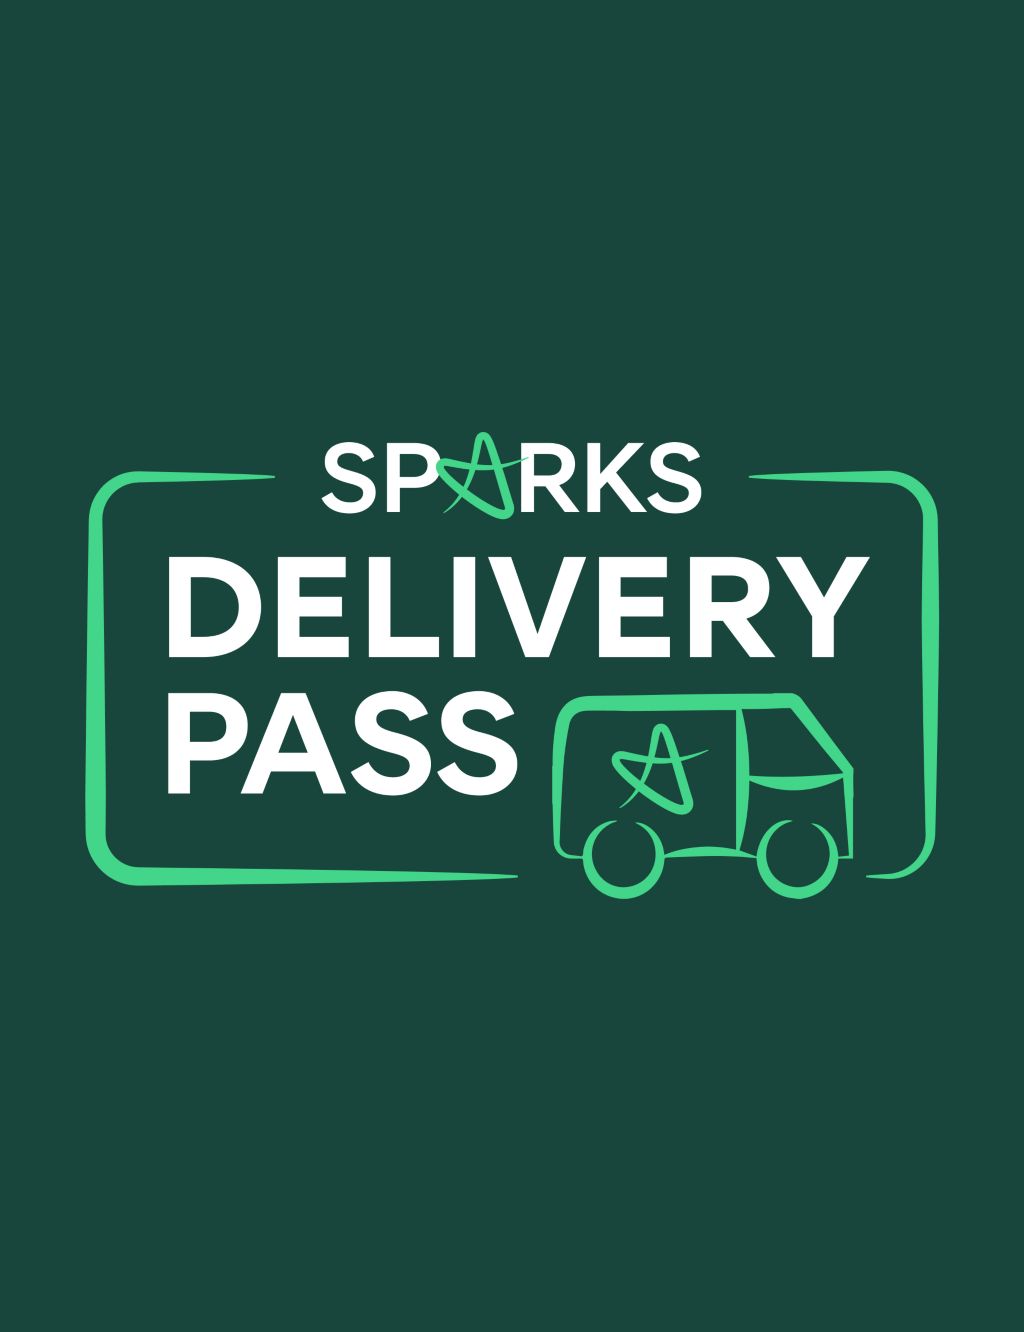 One Year Delivery Pass